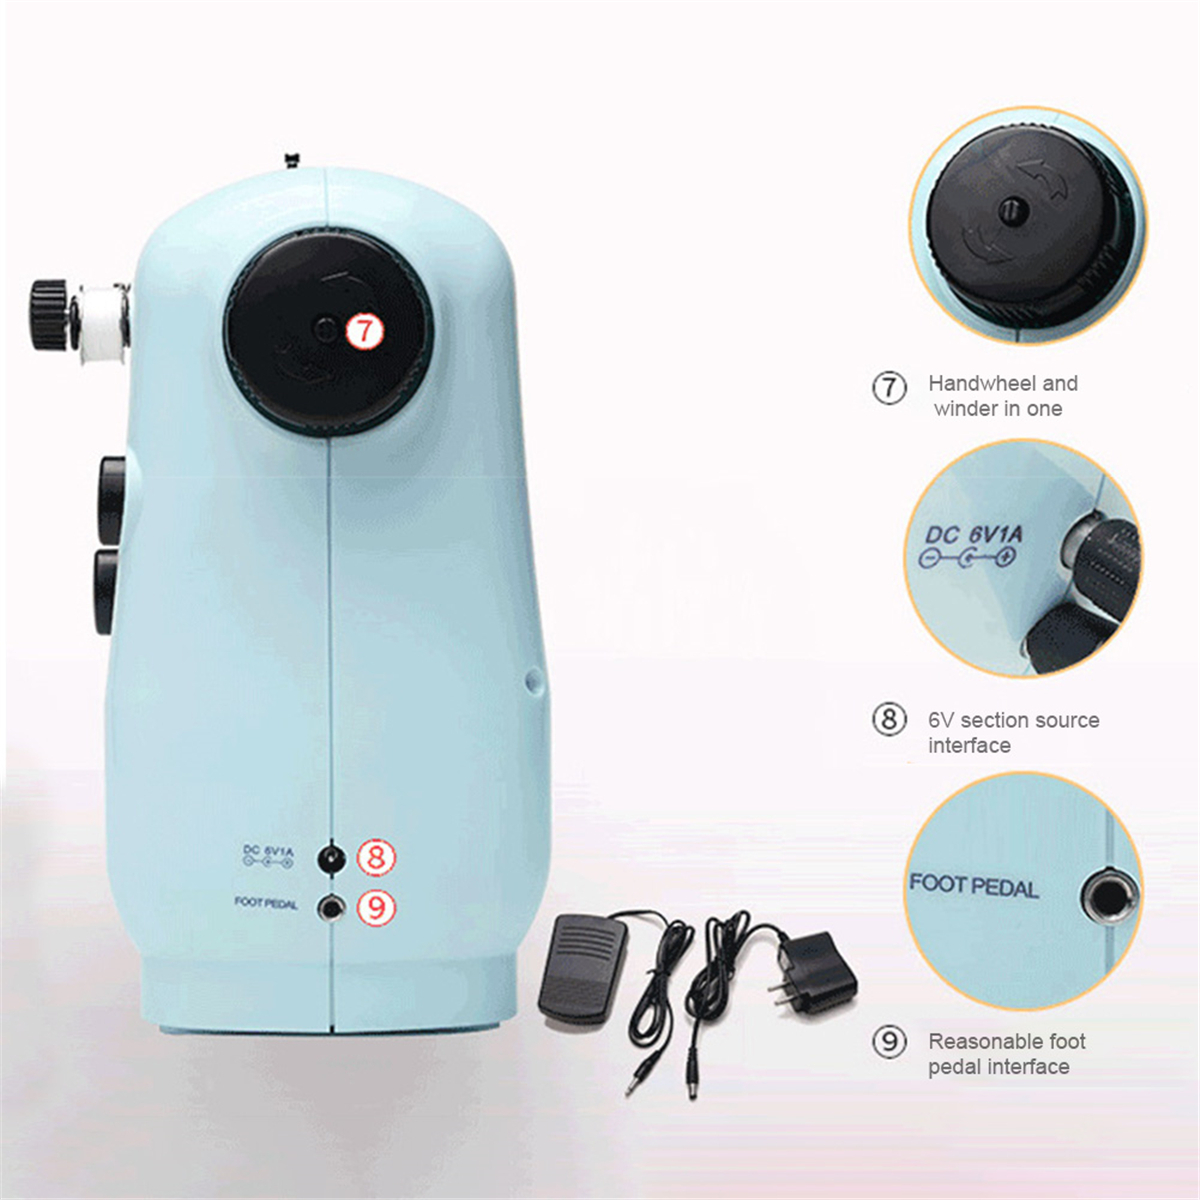 Mini-Portable-Electric-Desktop-Sewing-Machine-2-Speeds-For-DIY-Stitch-Clothes-Fabric-1690684-4